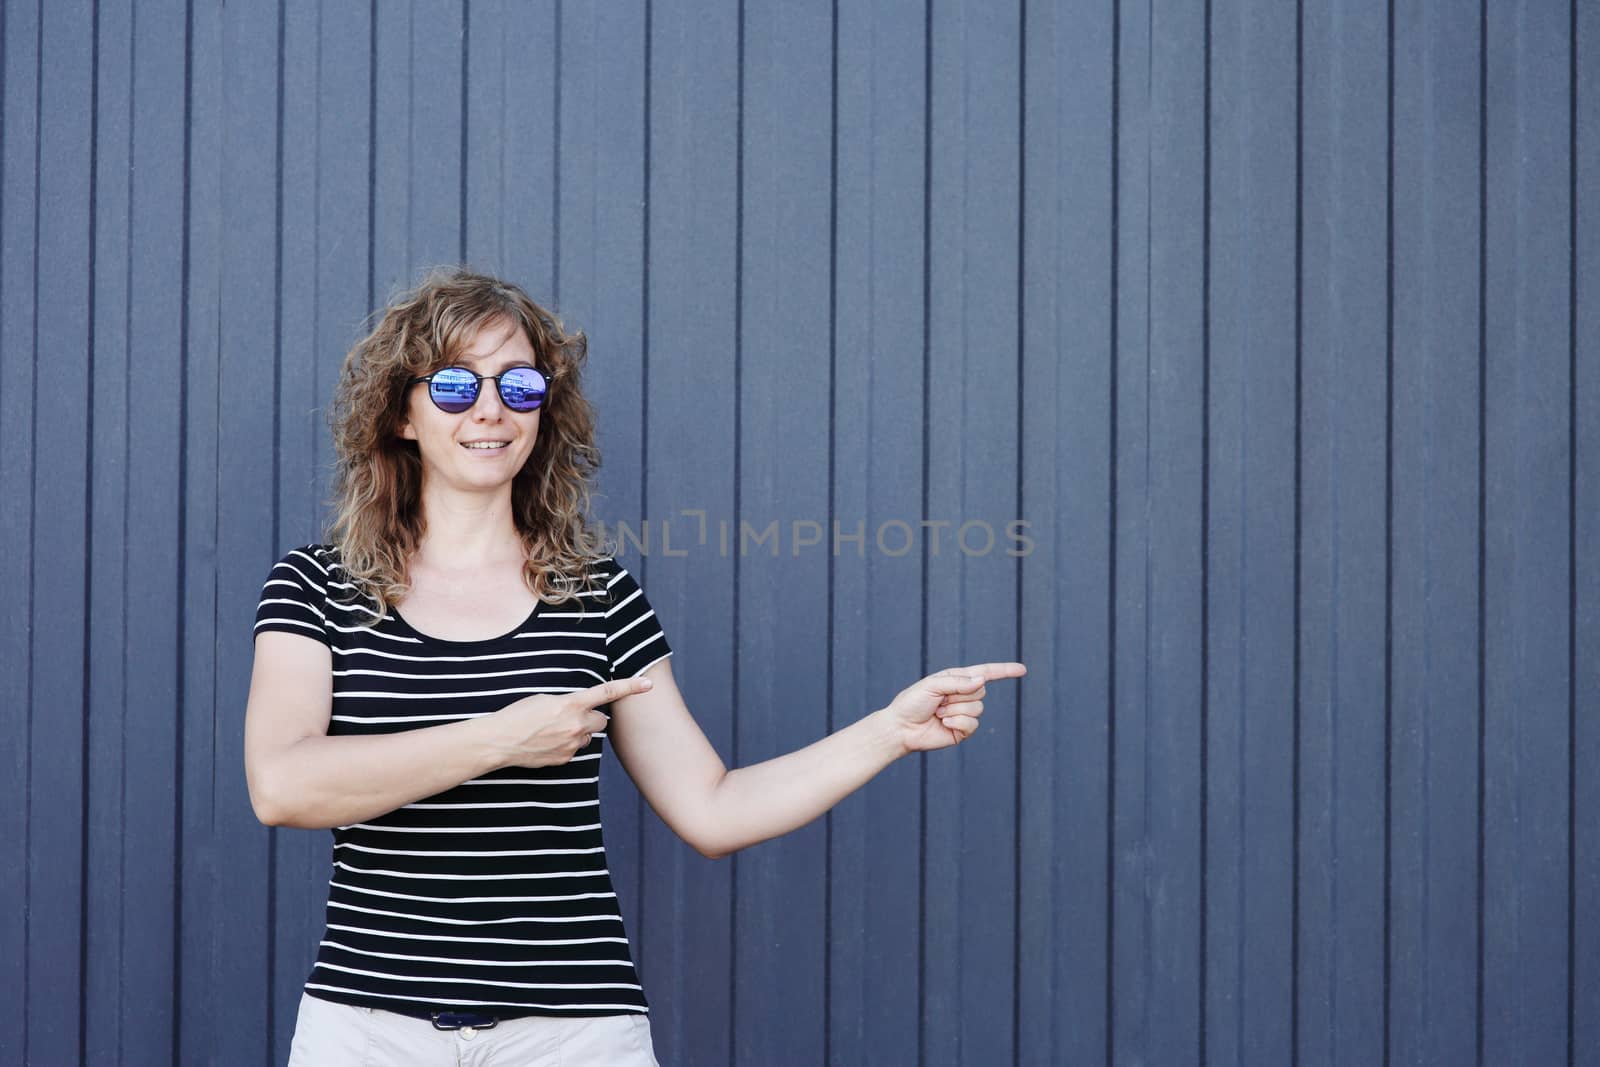 Woman portrait in sunglasses, free space for text. Blue striped wall in the background